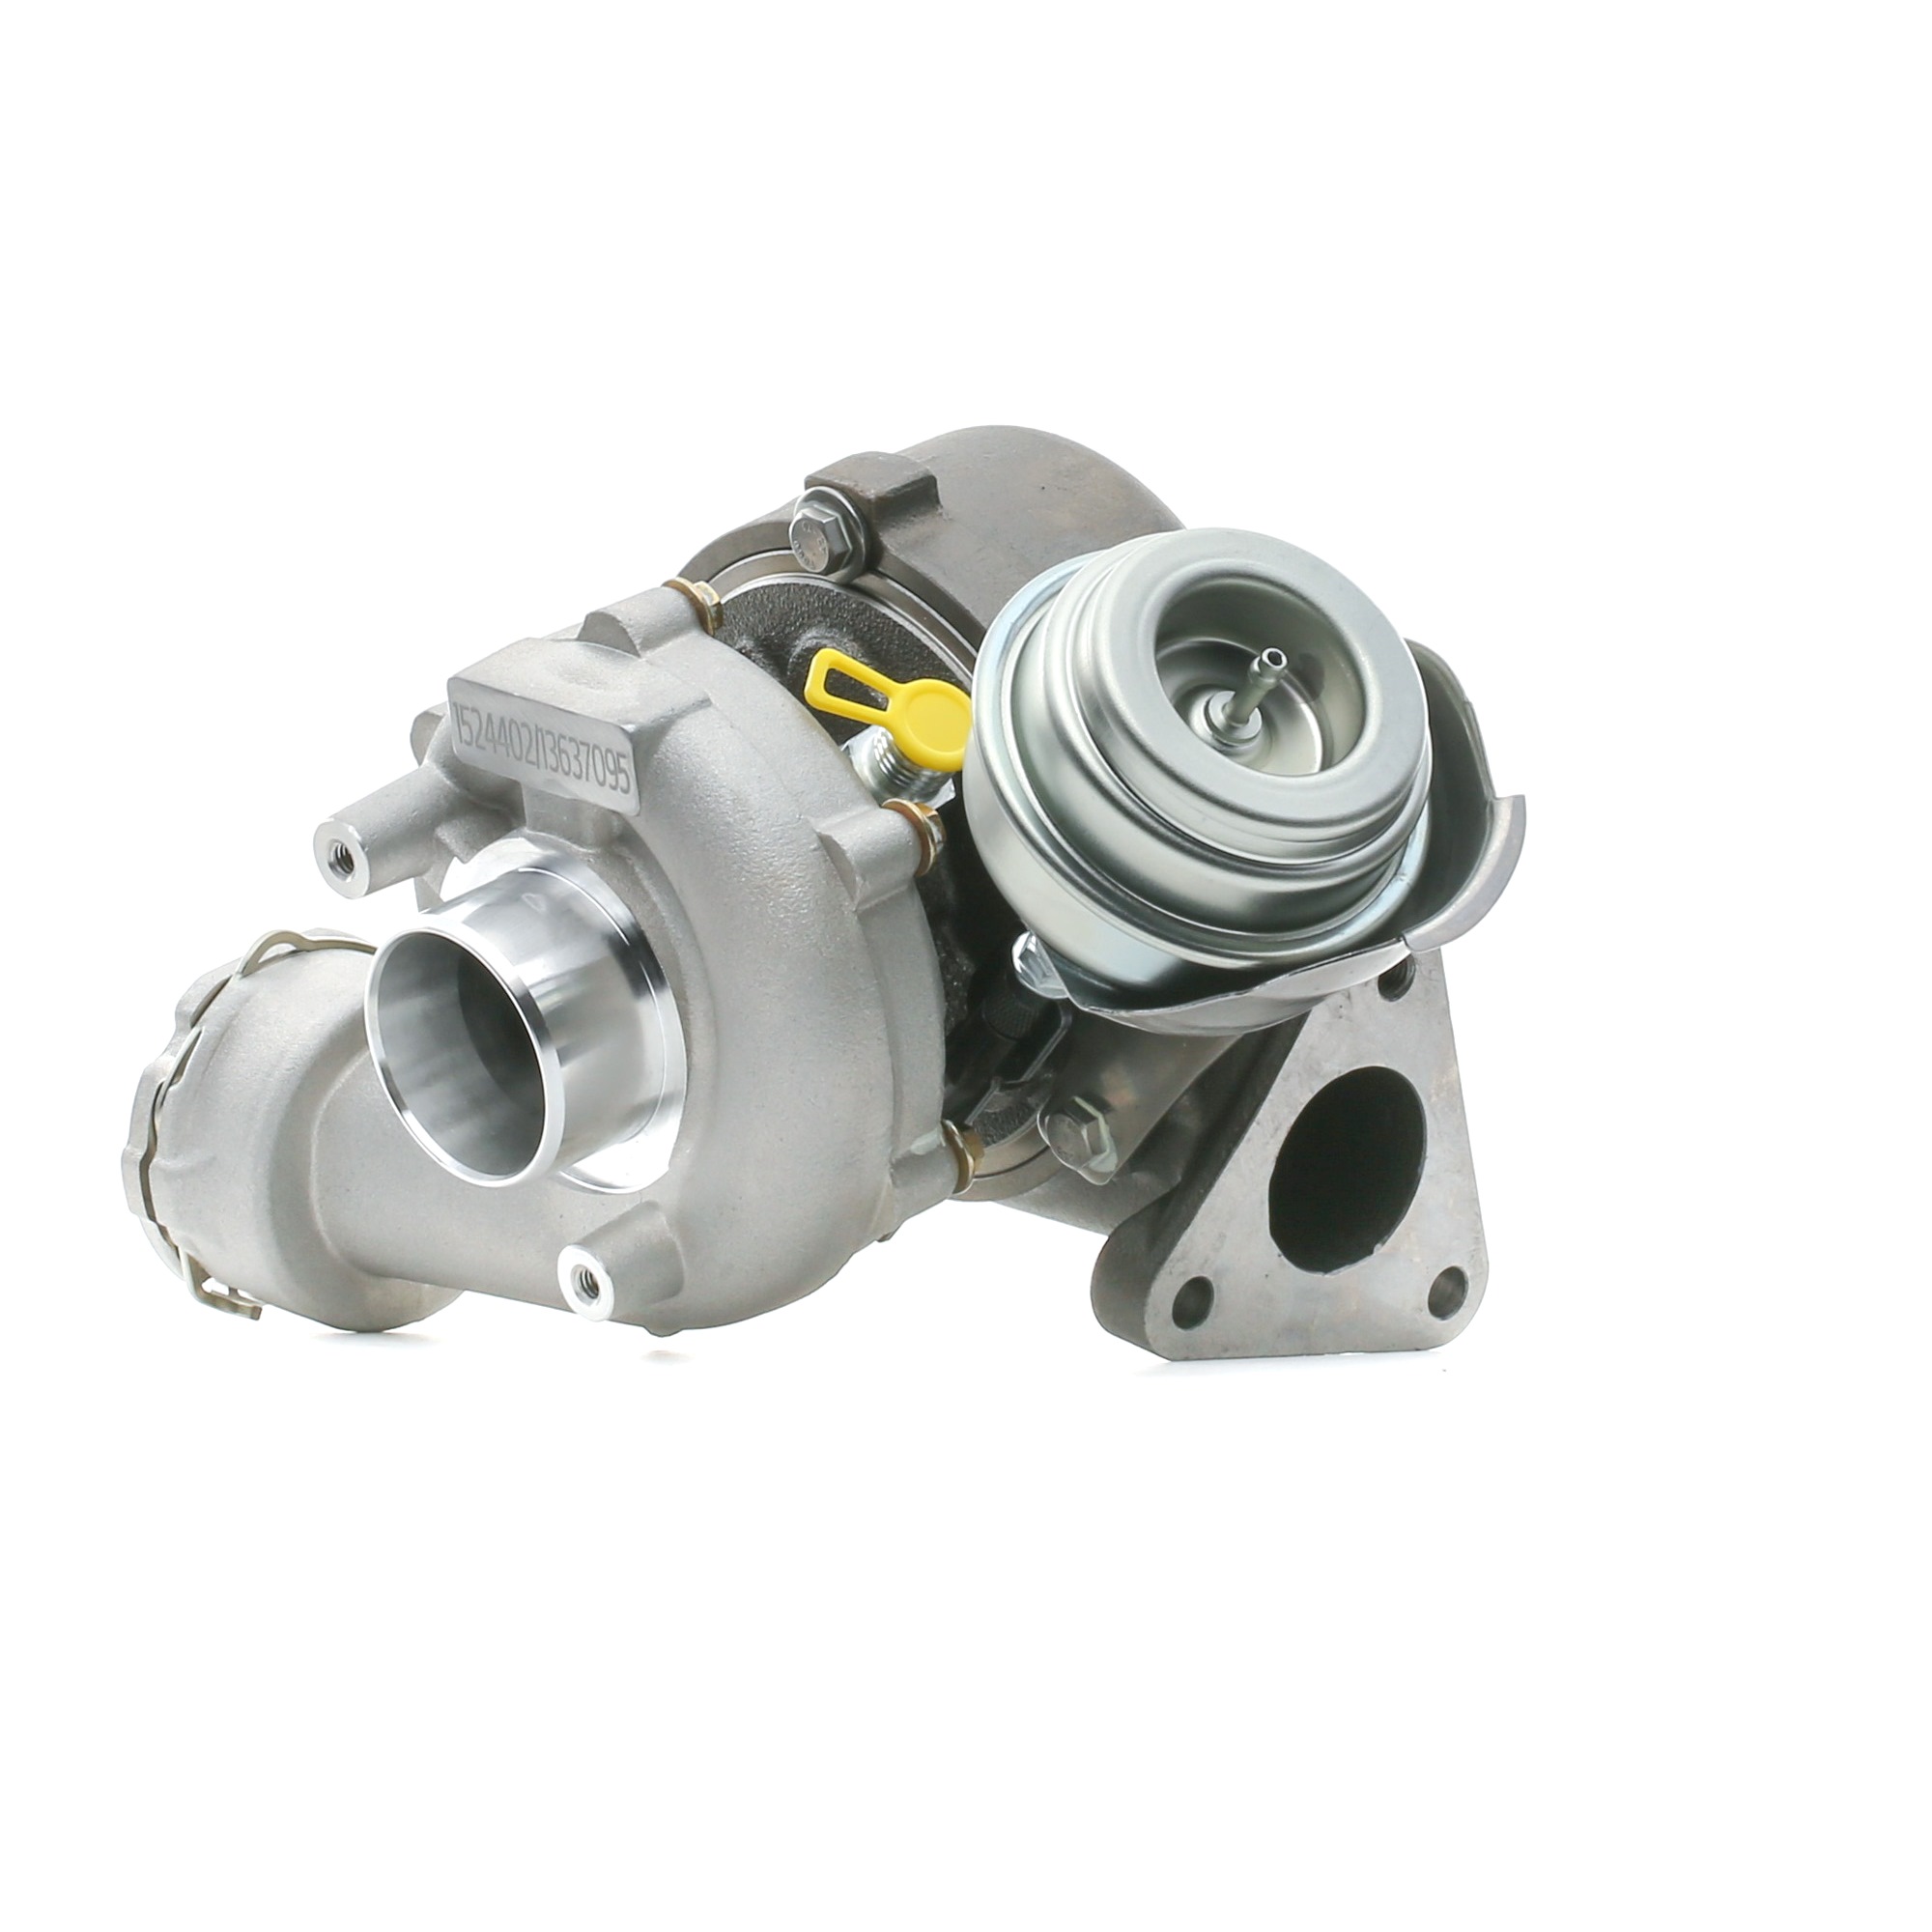 RIDEX 2234C0090 Turbocharger Exhaust Turbocharger, Euro 4 (D4), Pneumatic, without attachment material